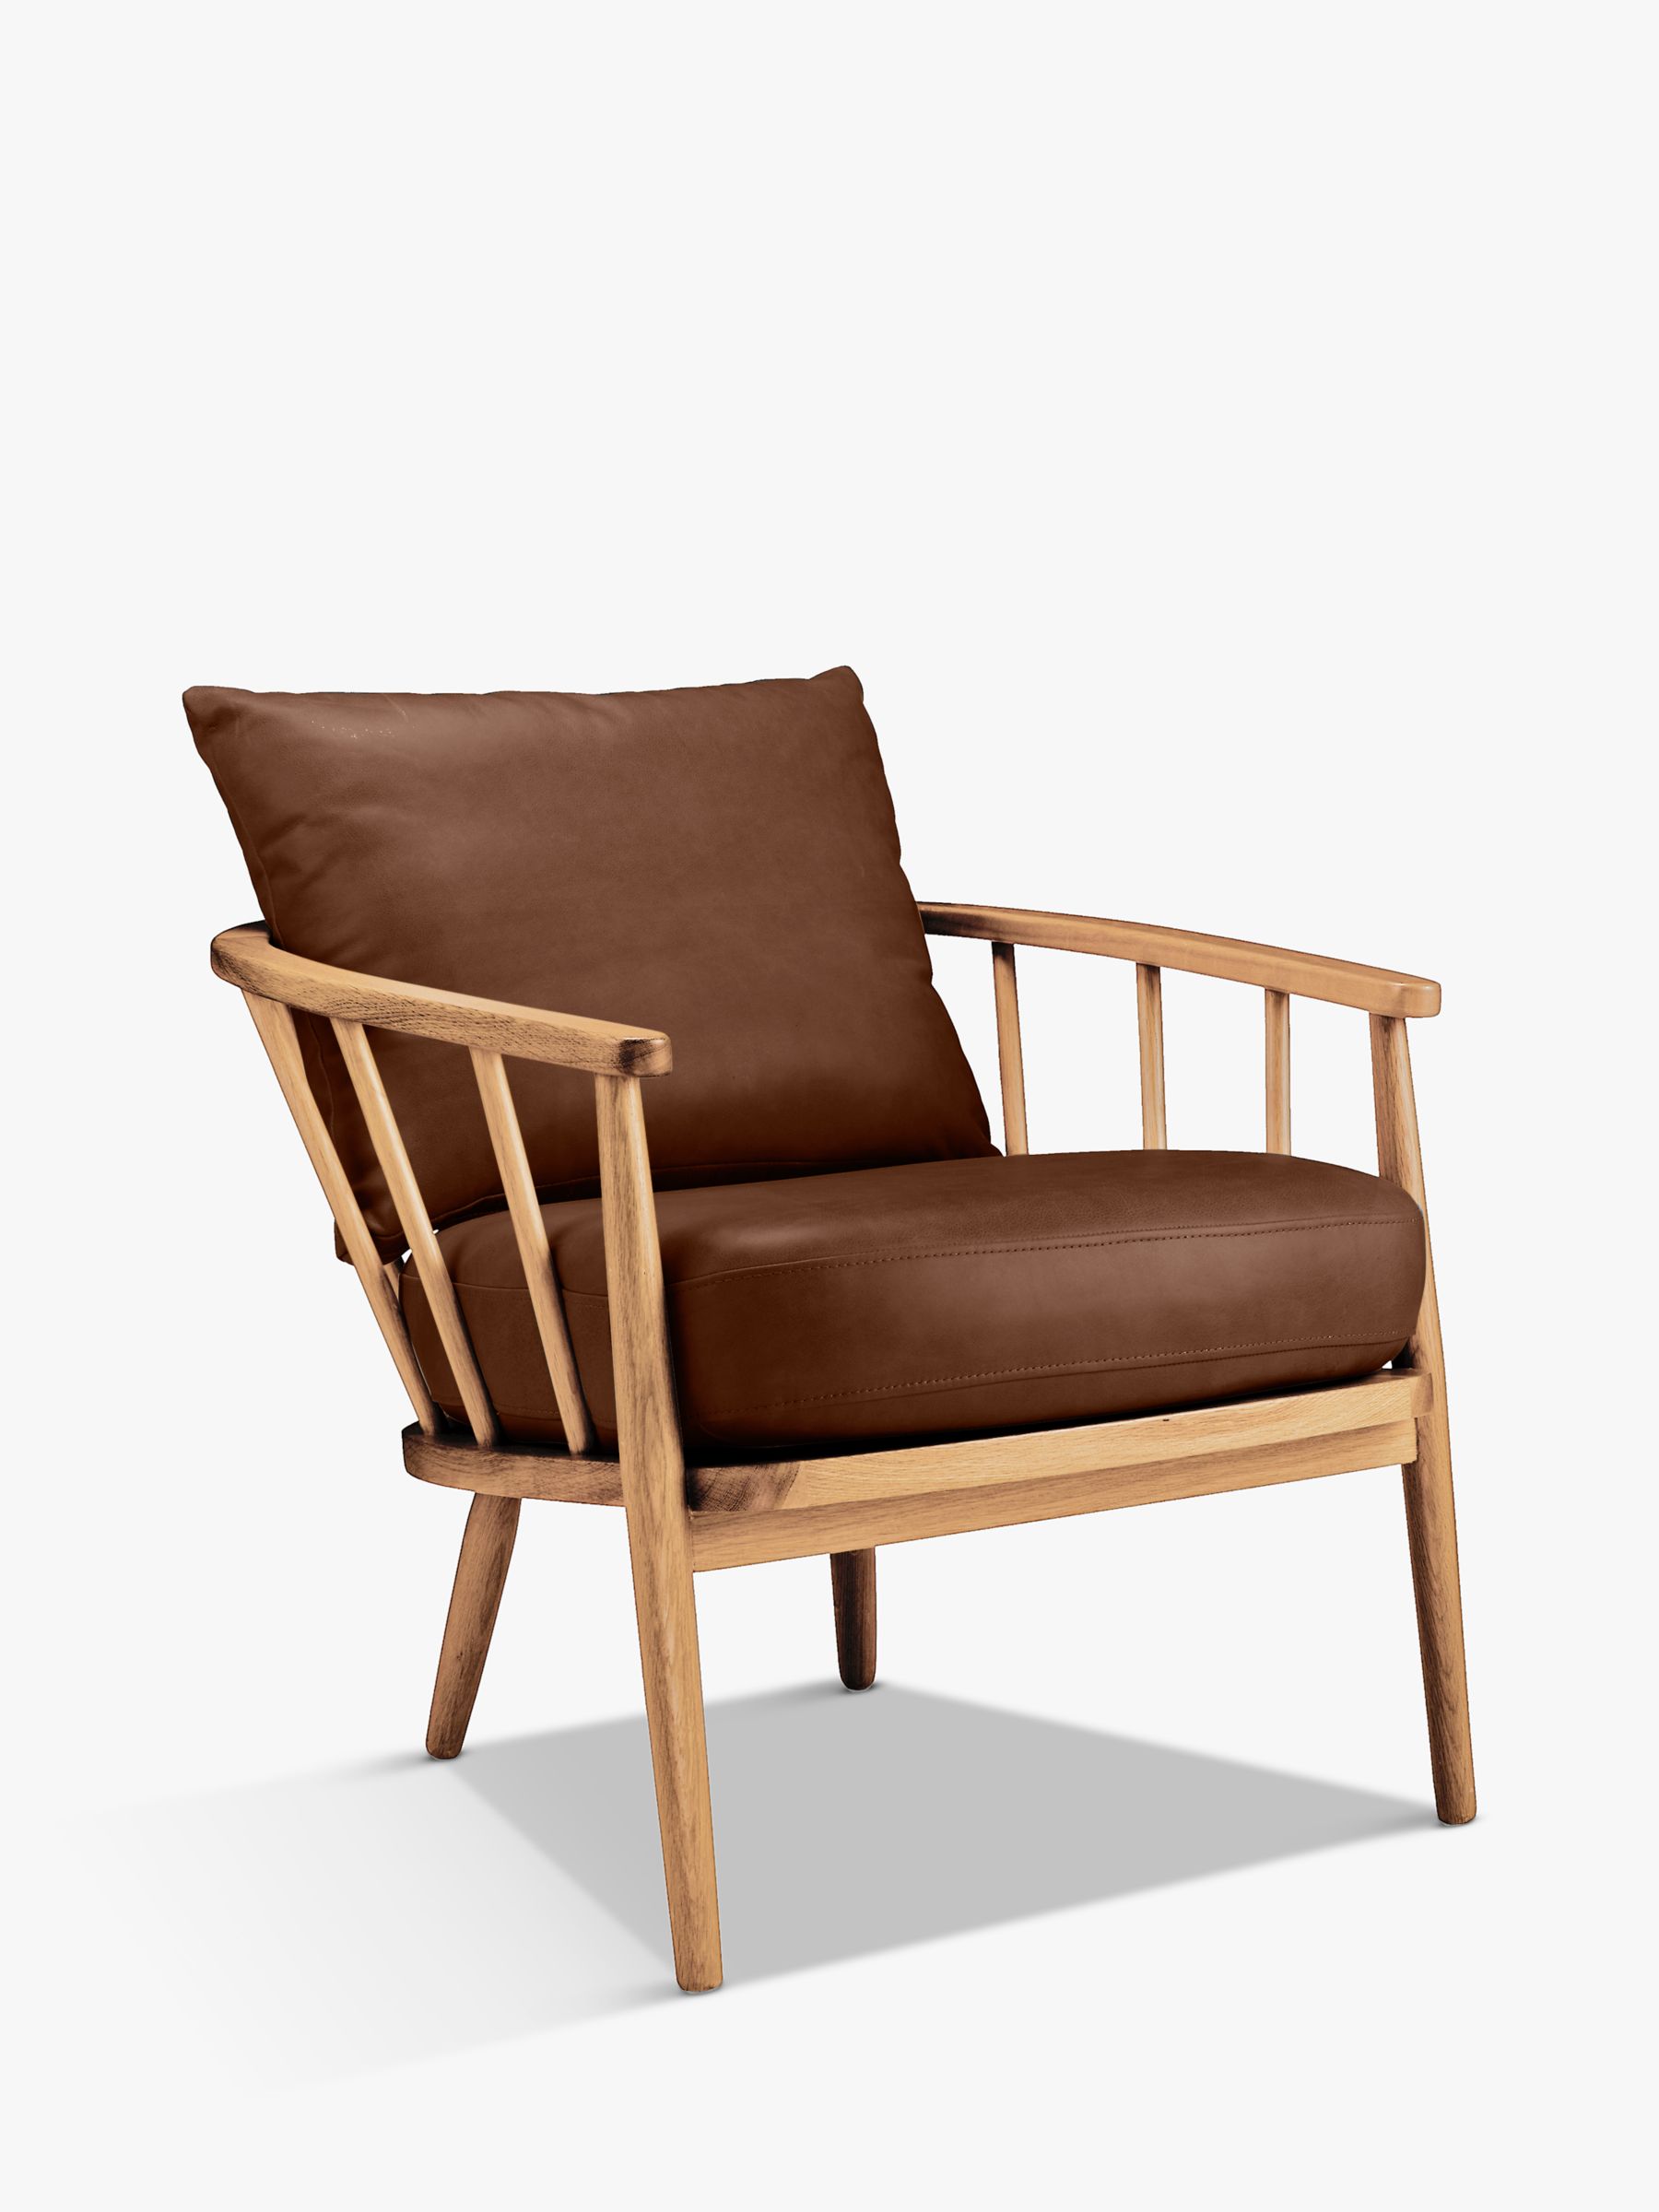 Frome Range, John Lewis Frome Leather Armchair, Light Wood Frame, Contempo Castanga